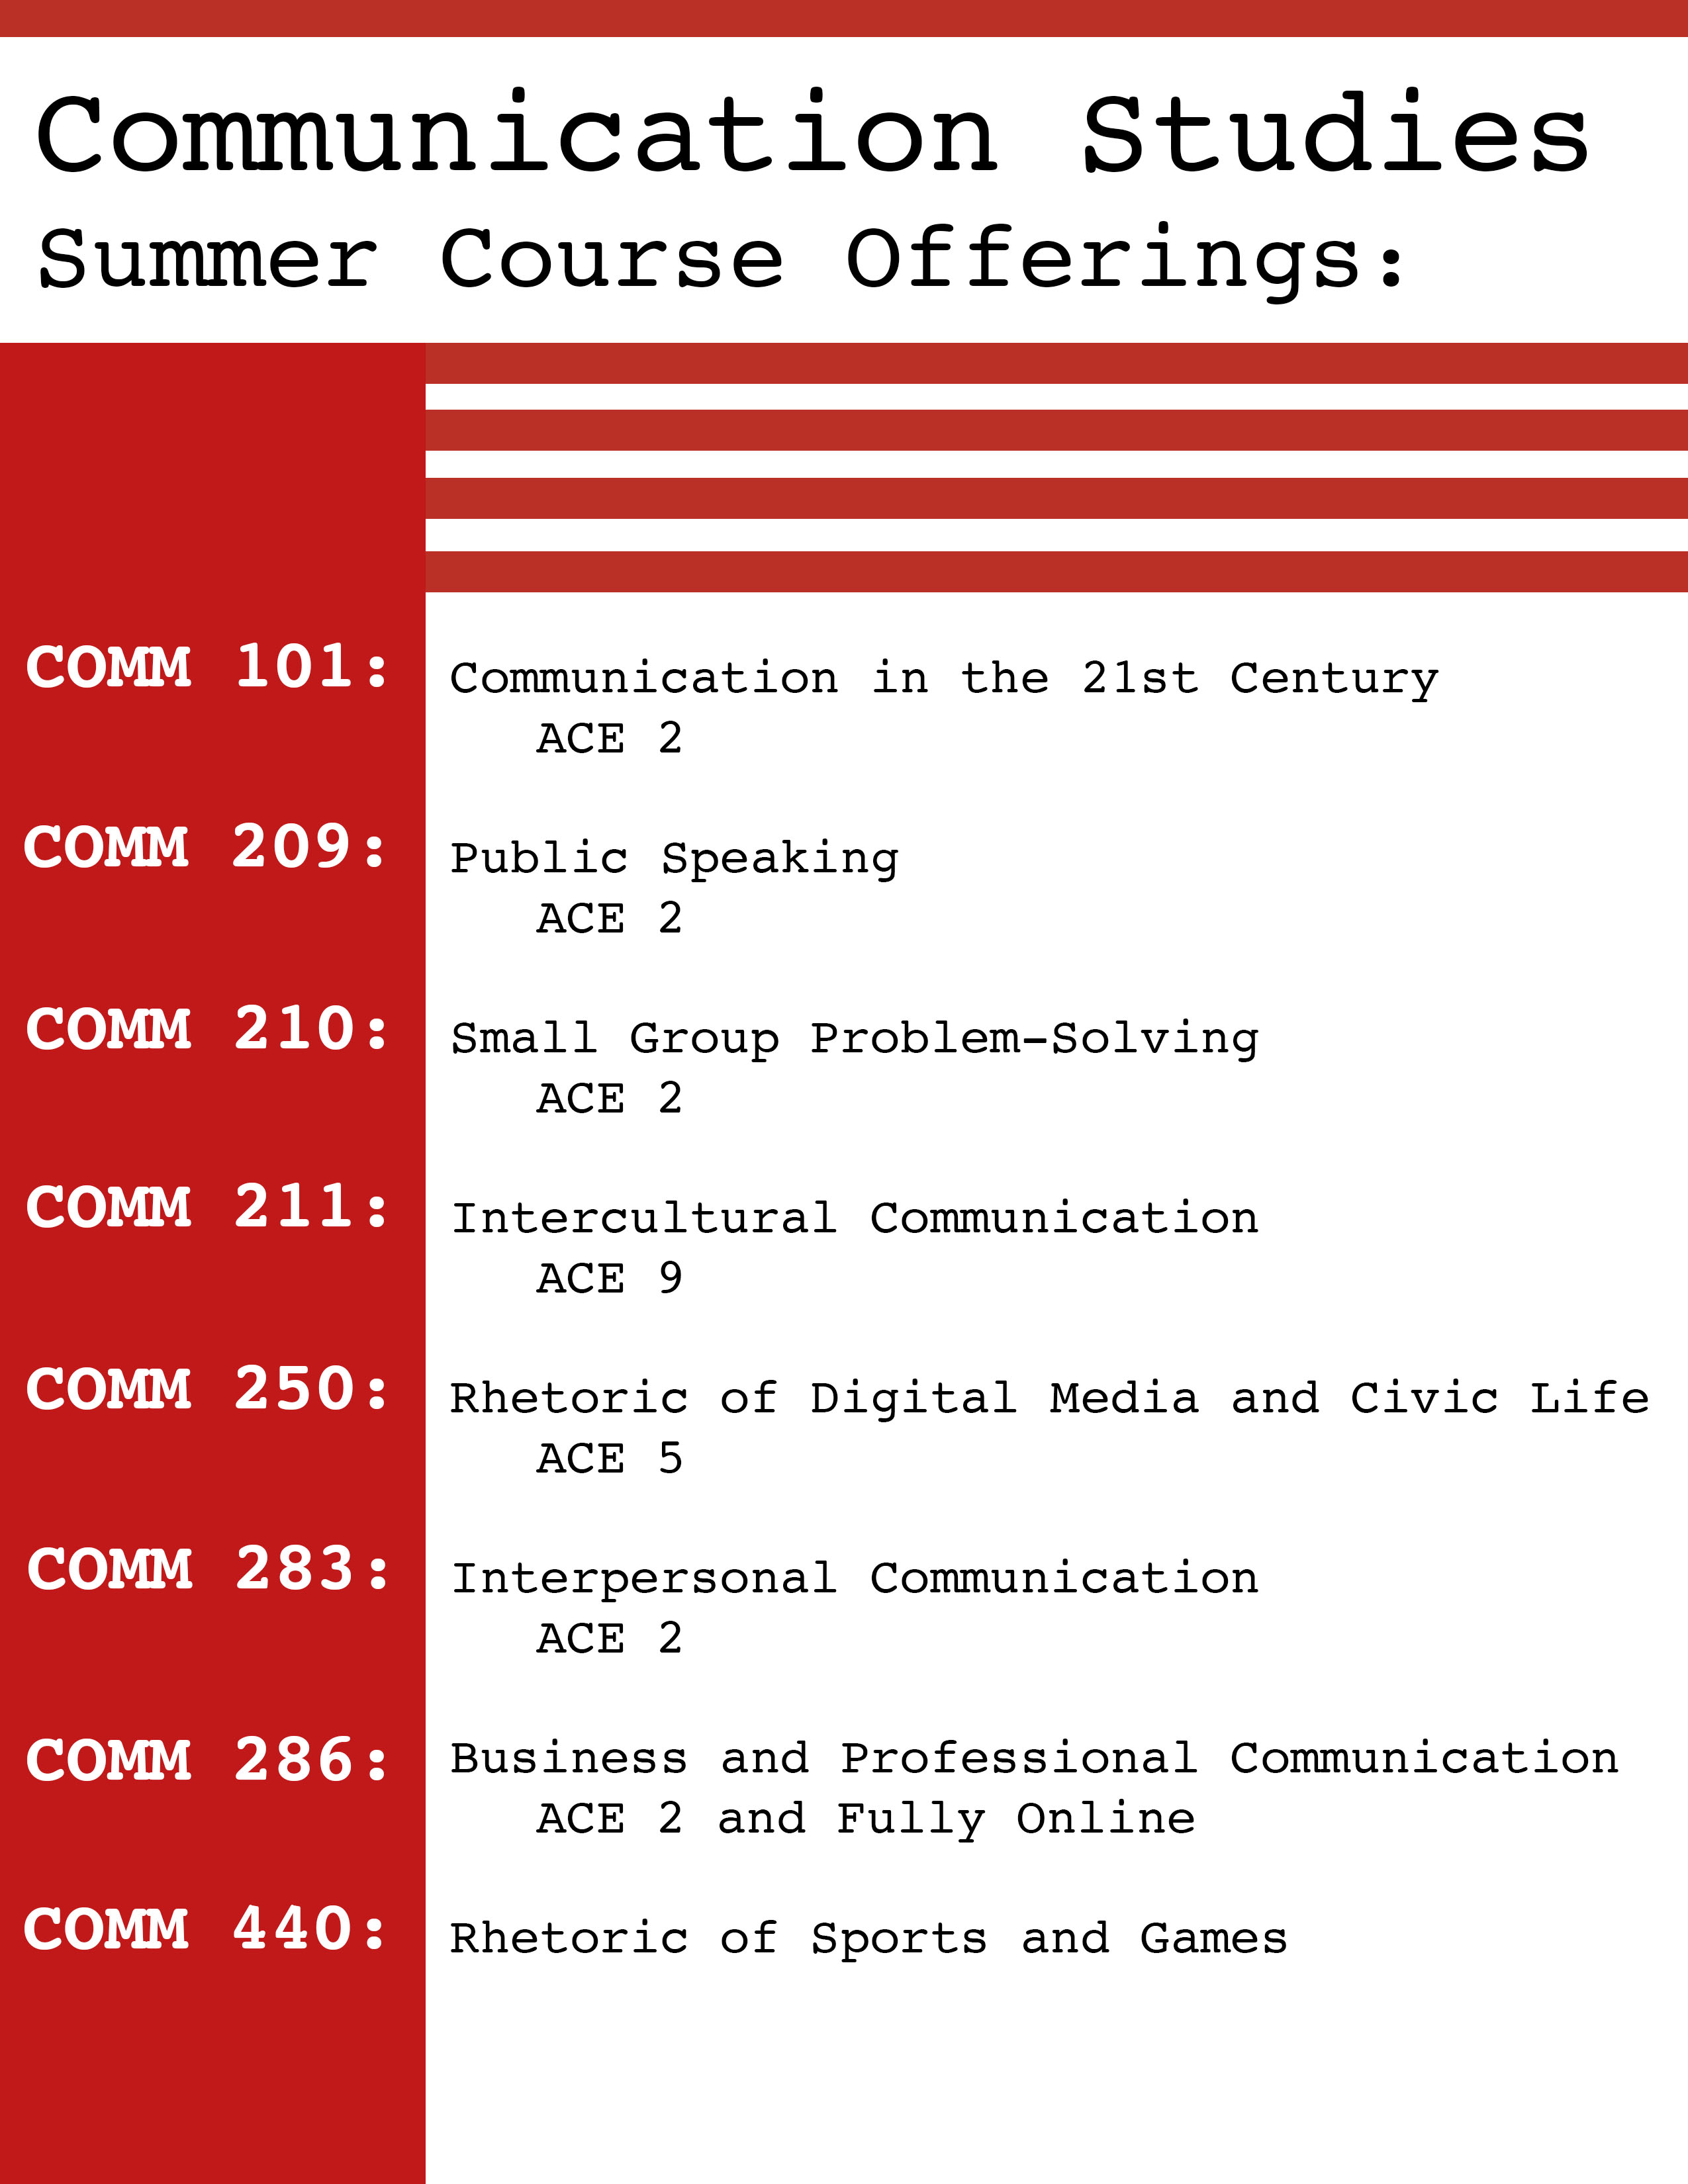 Summer 2018 Course Offerings